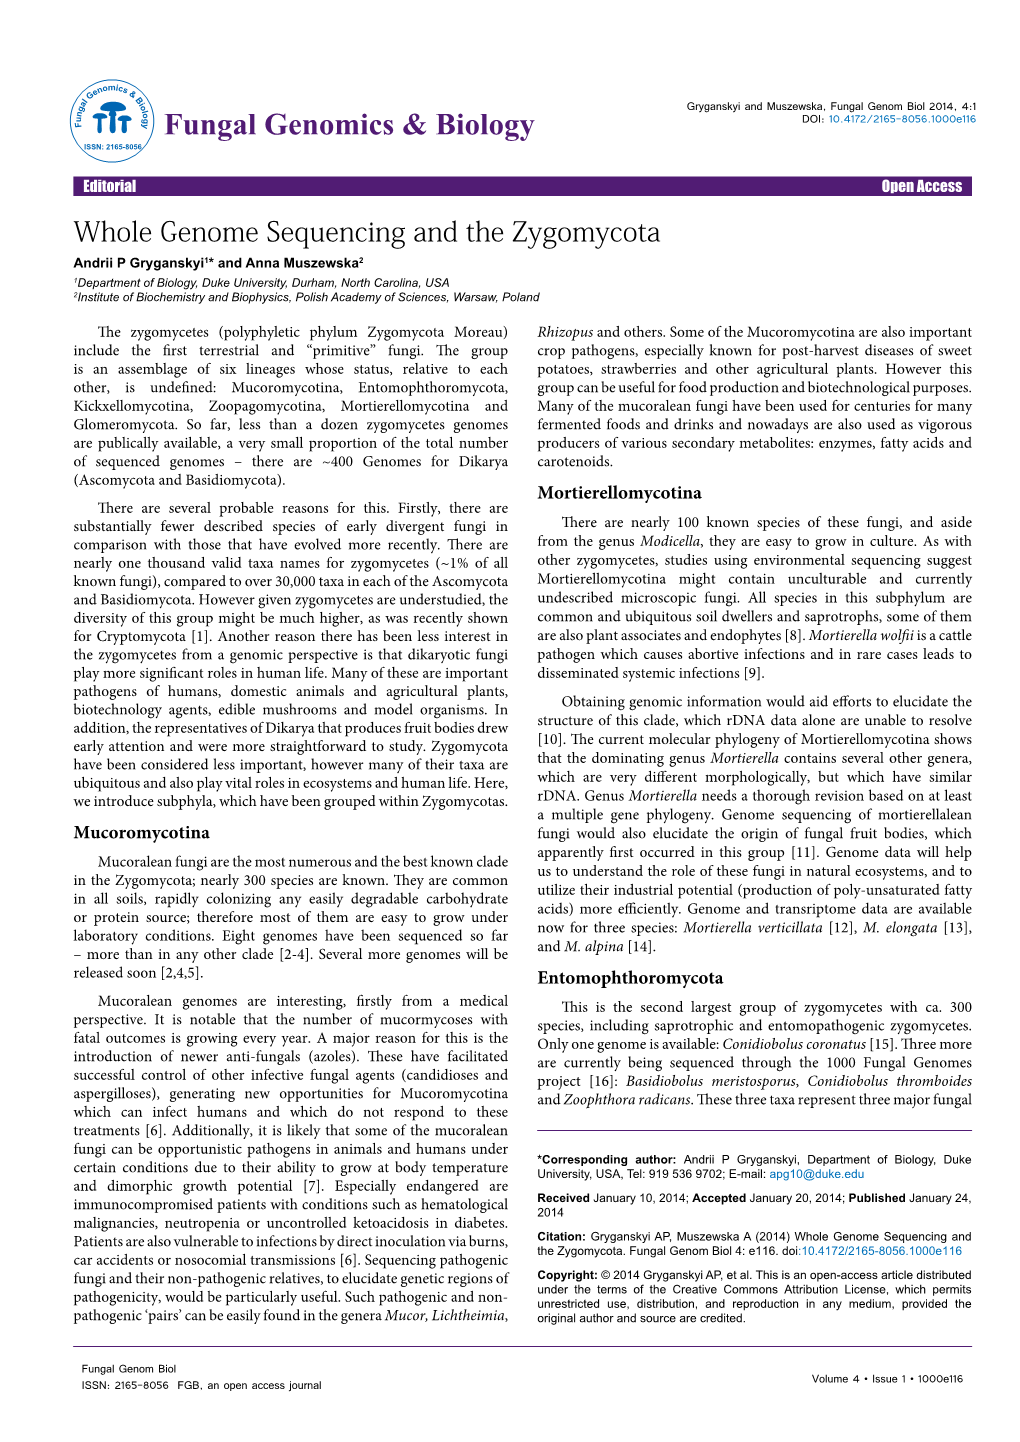 Whole Genome Sequencing and the Zygomycota